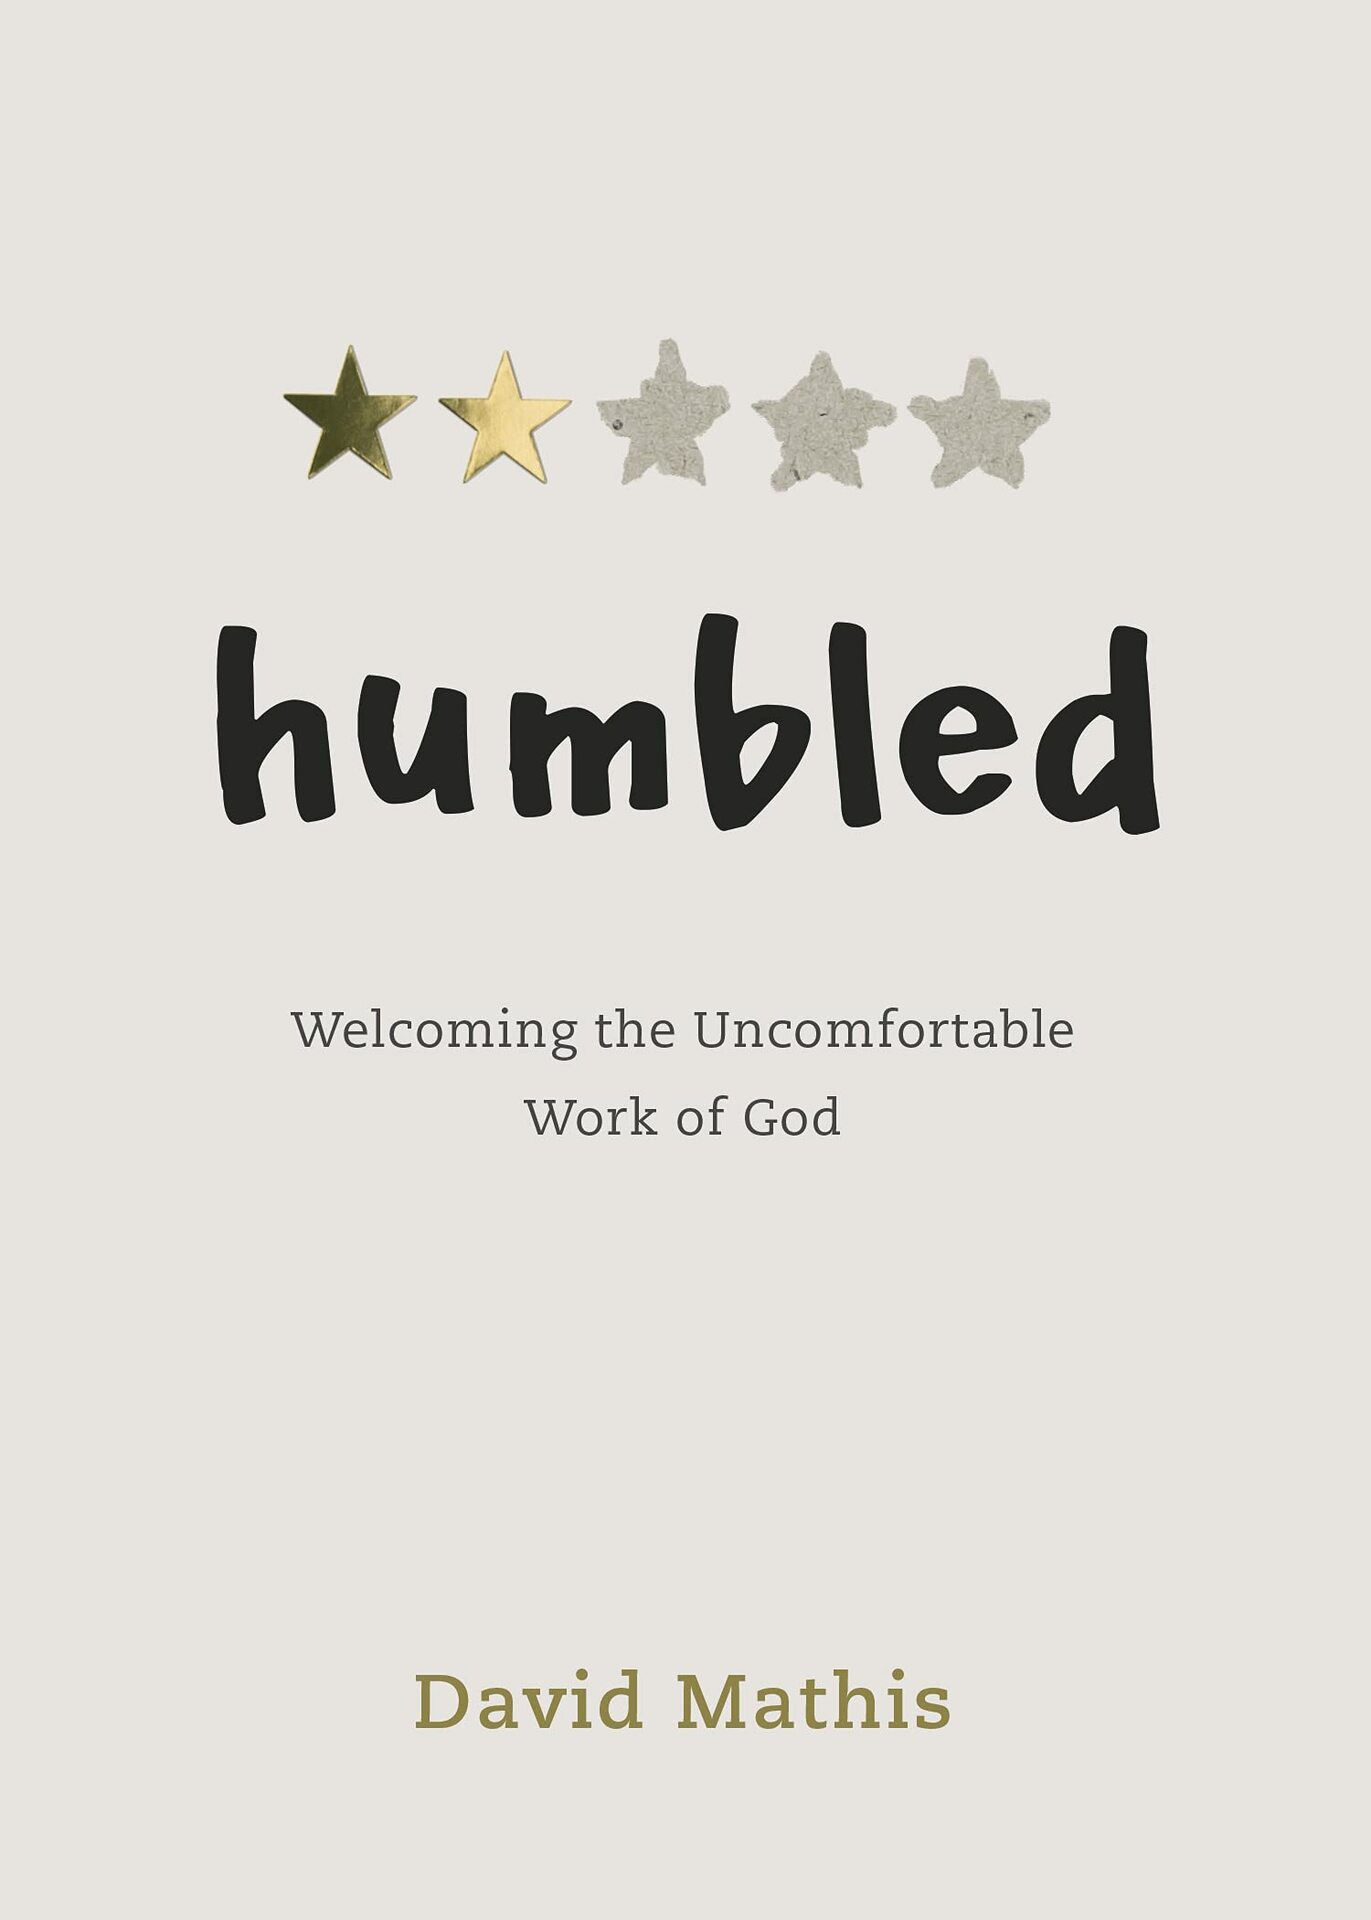  Humbled: Welcoming the Uncomfortable Work of God.